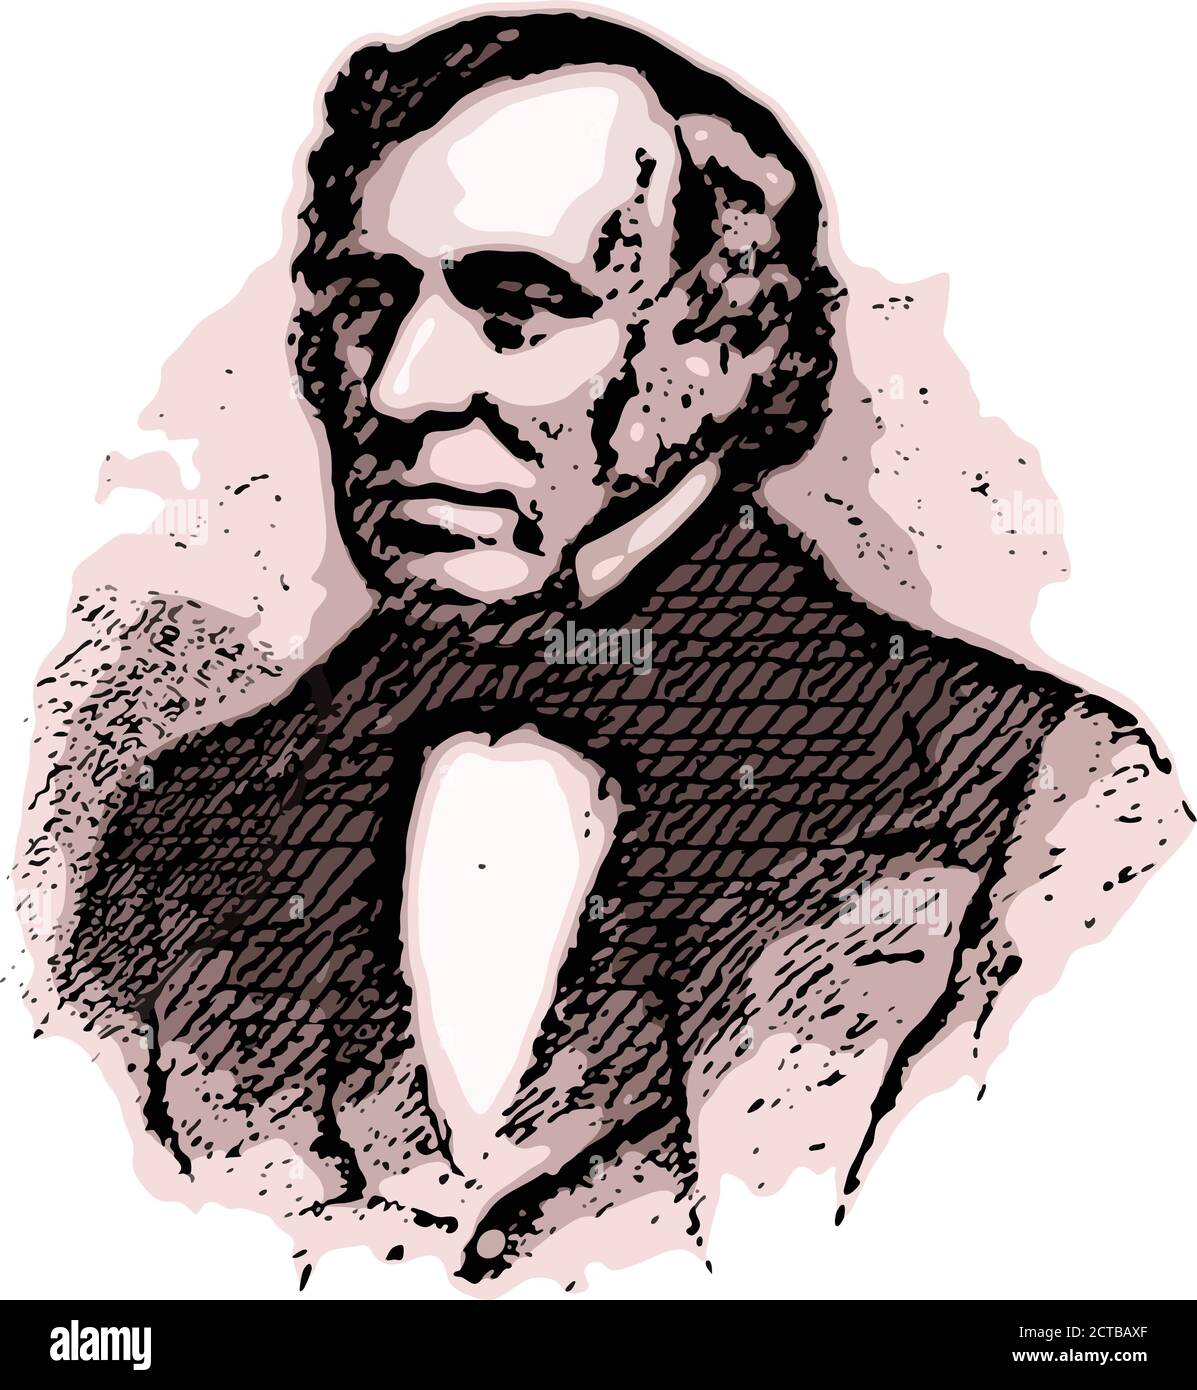 Vector portrait of president Zachary Taylor. Zachary Taylor (1784 – 1850) was the 12th president of the United States, serving from March 1849 until h Stock Vector